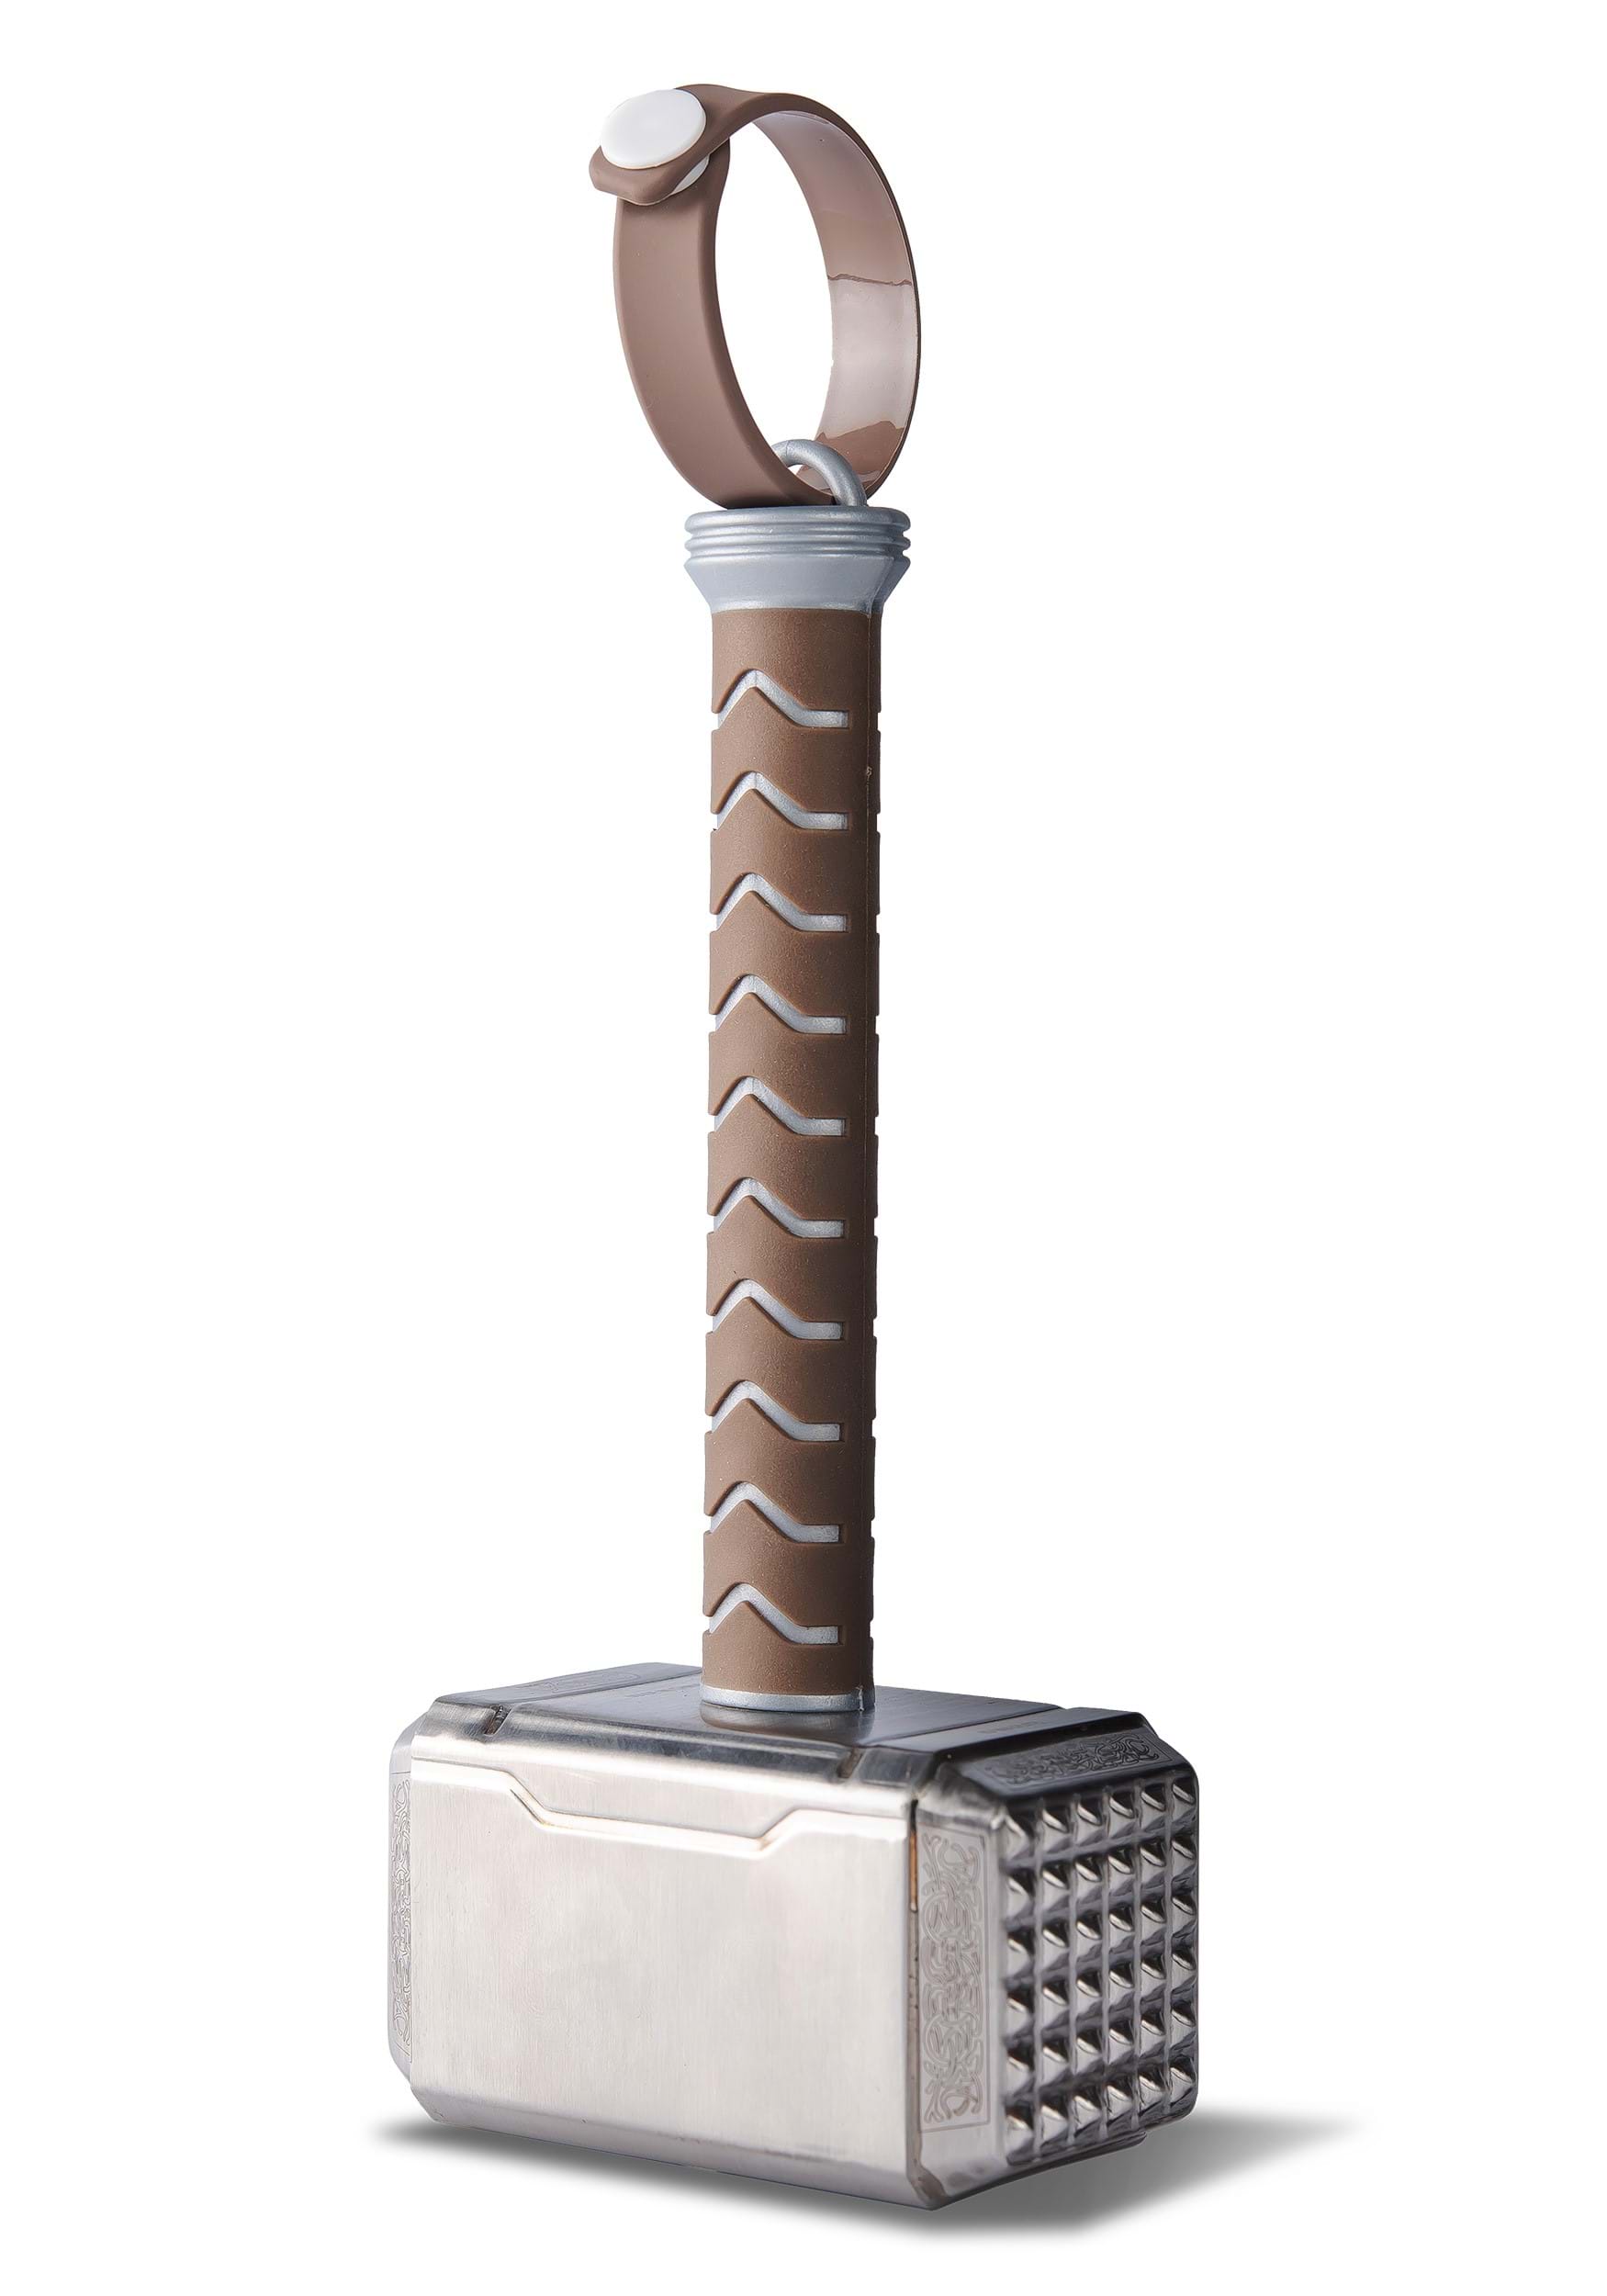 https://images.fun.com/products/89796/1-1/marvel-thor-meat-tenderizer.jpg